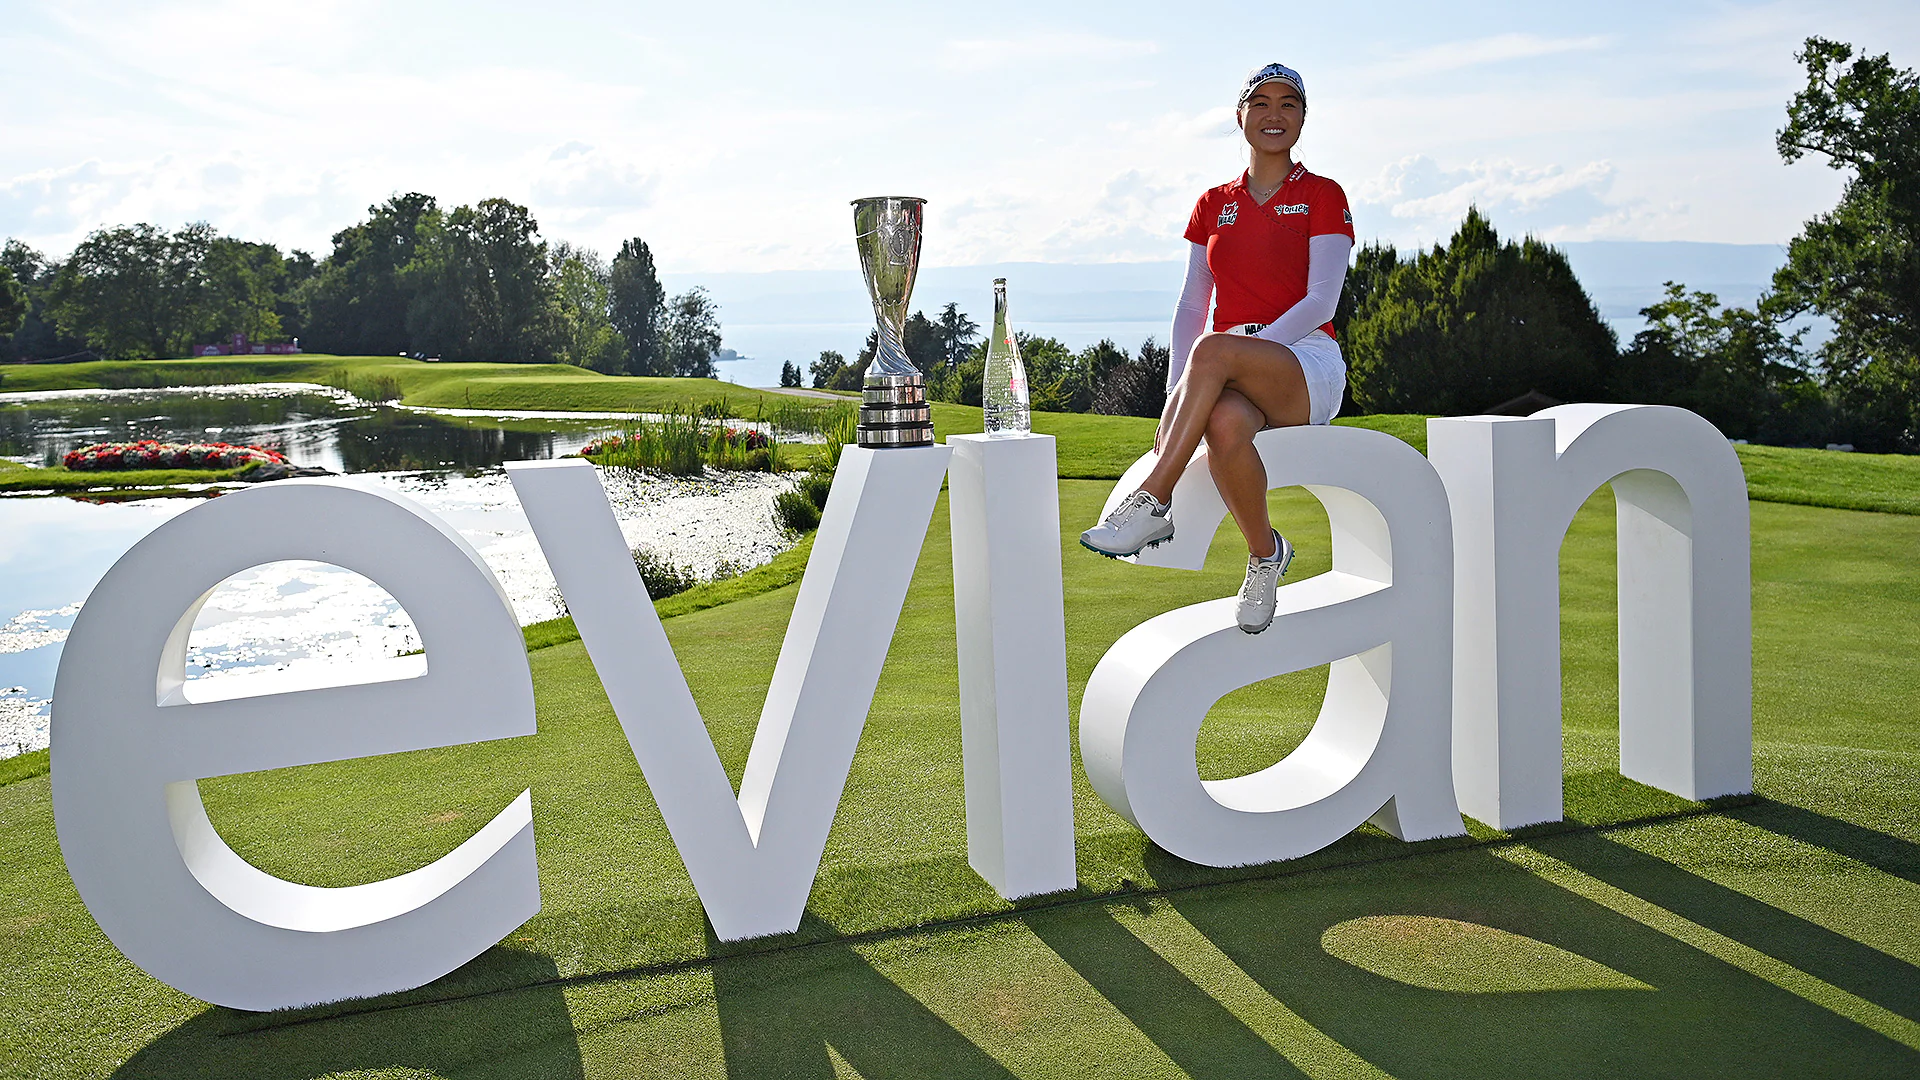 Live stream schedule for Evian Championship, Senior Open and 3M Open